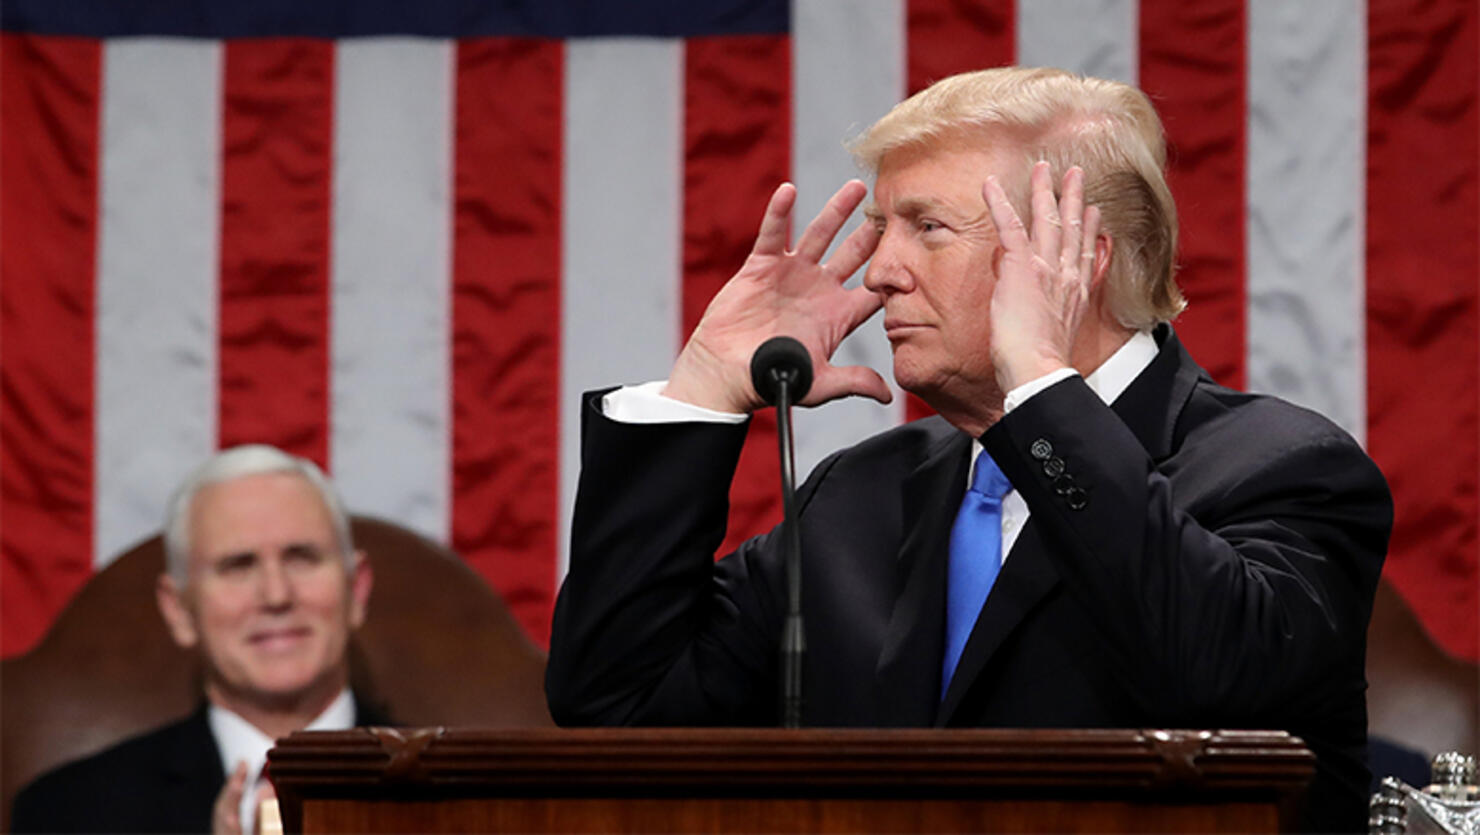 U.S. President Donald J. Trump delivers the State of the Union address in the chamber of the U.S. House of Representatives 